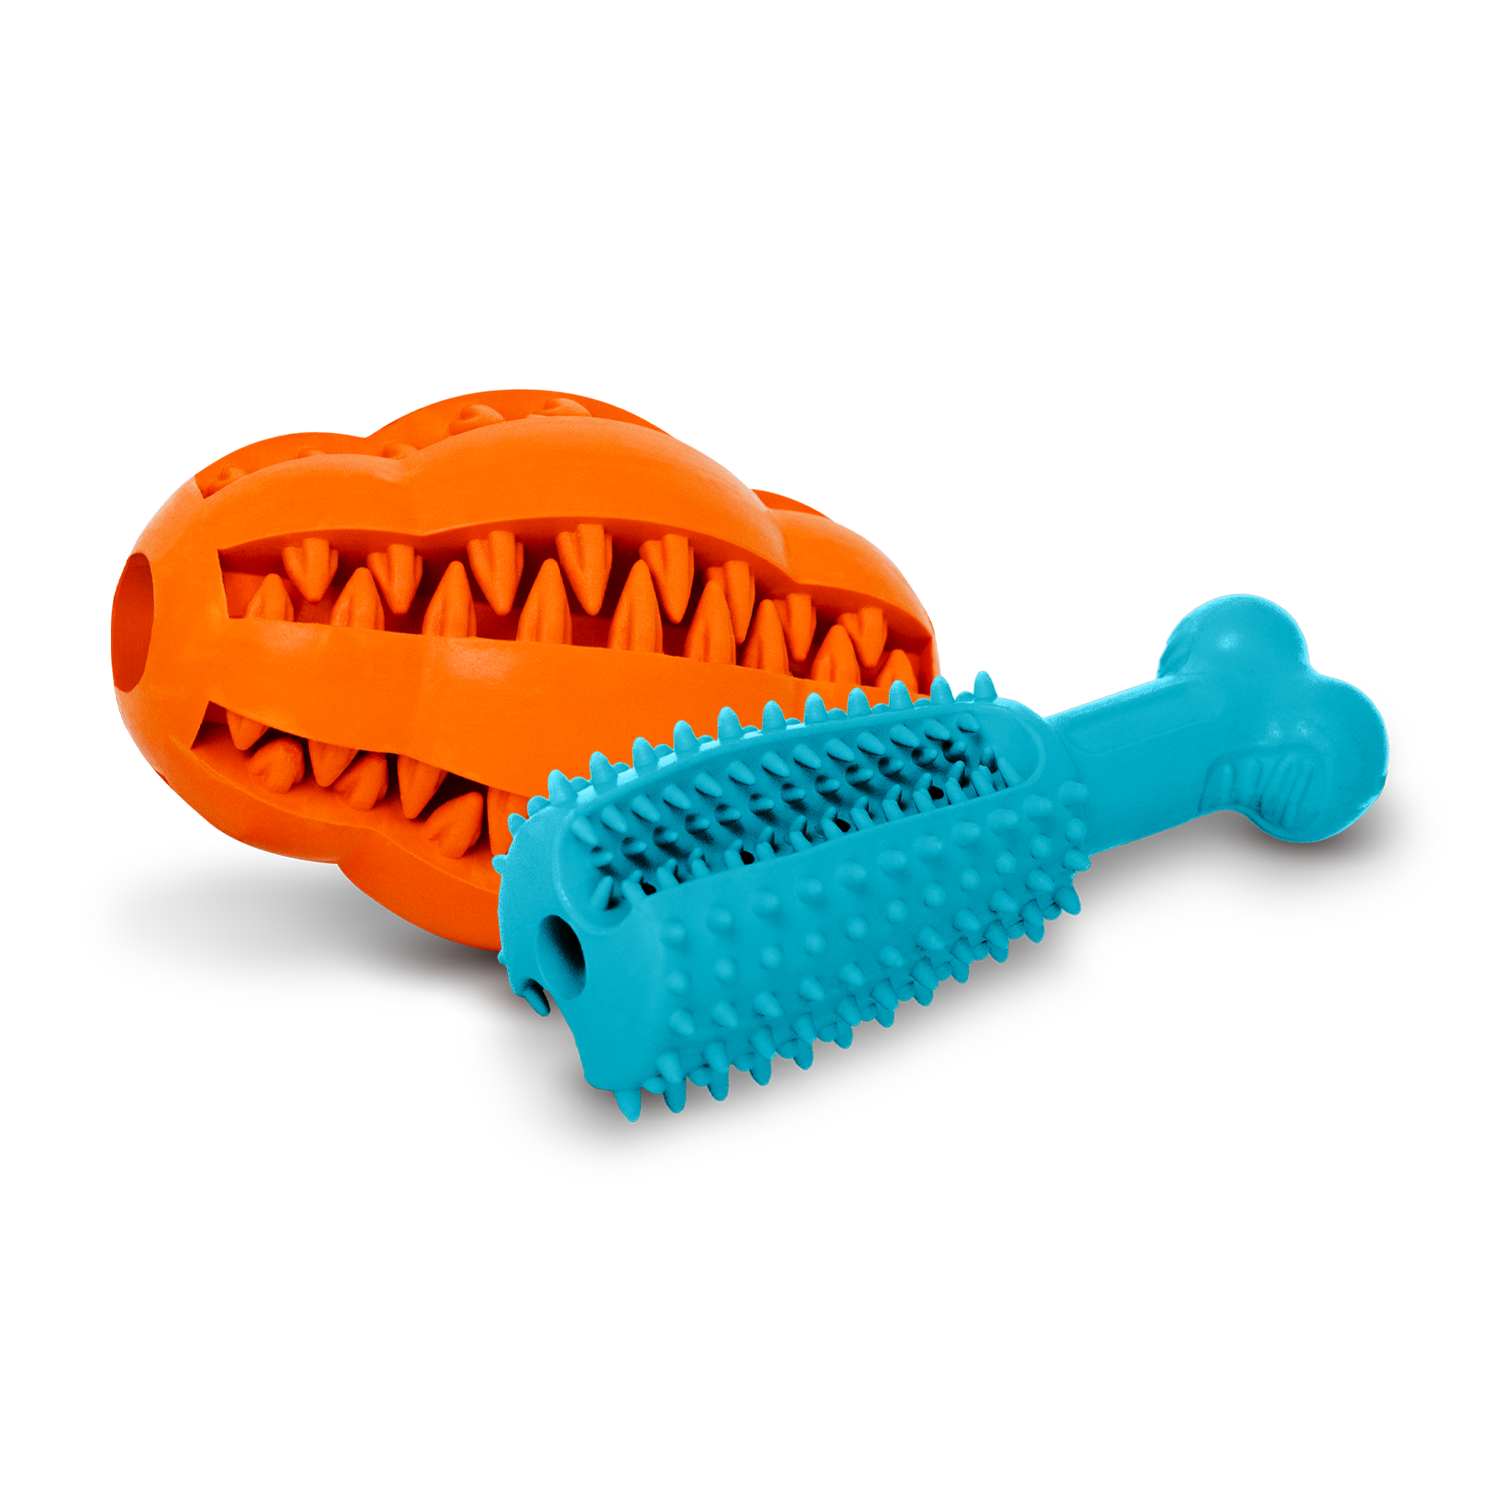 100% Natural Rubber Dog Dental Toy – Fun, Easy Way to Clean Dog Teeth